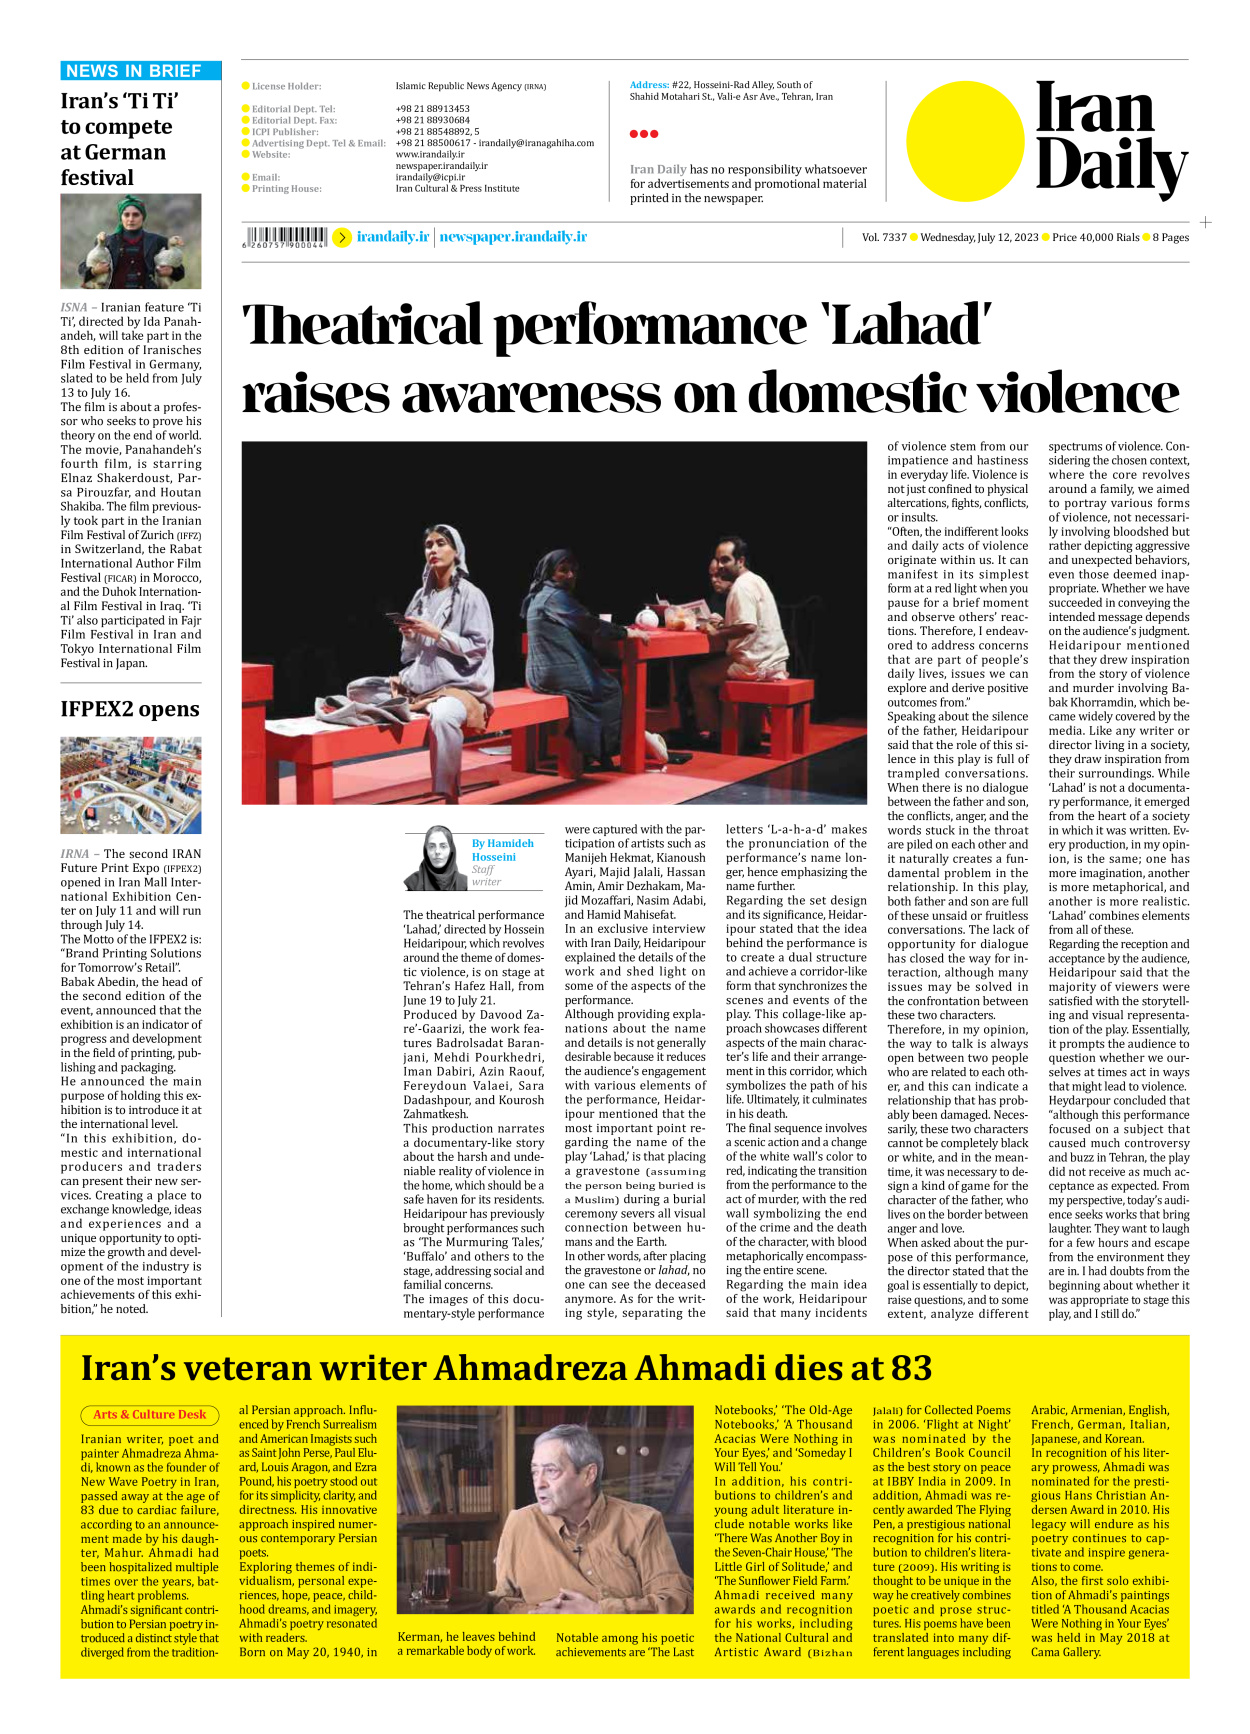 Iran Daily - Number Seven Thousand Three Hundred and Thirty Seven - 12 July 2023 - Page 8